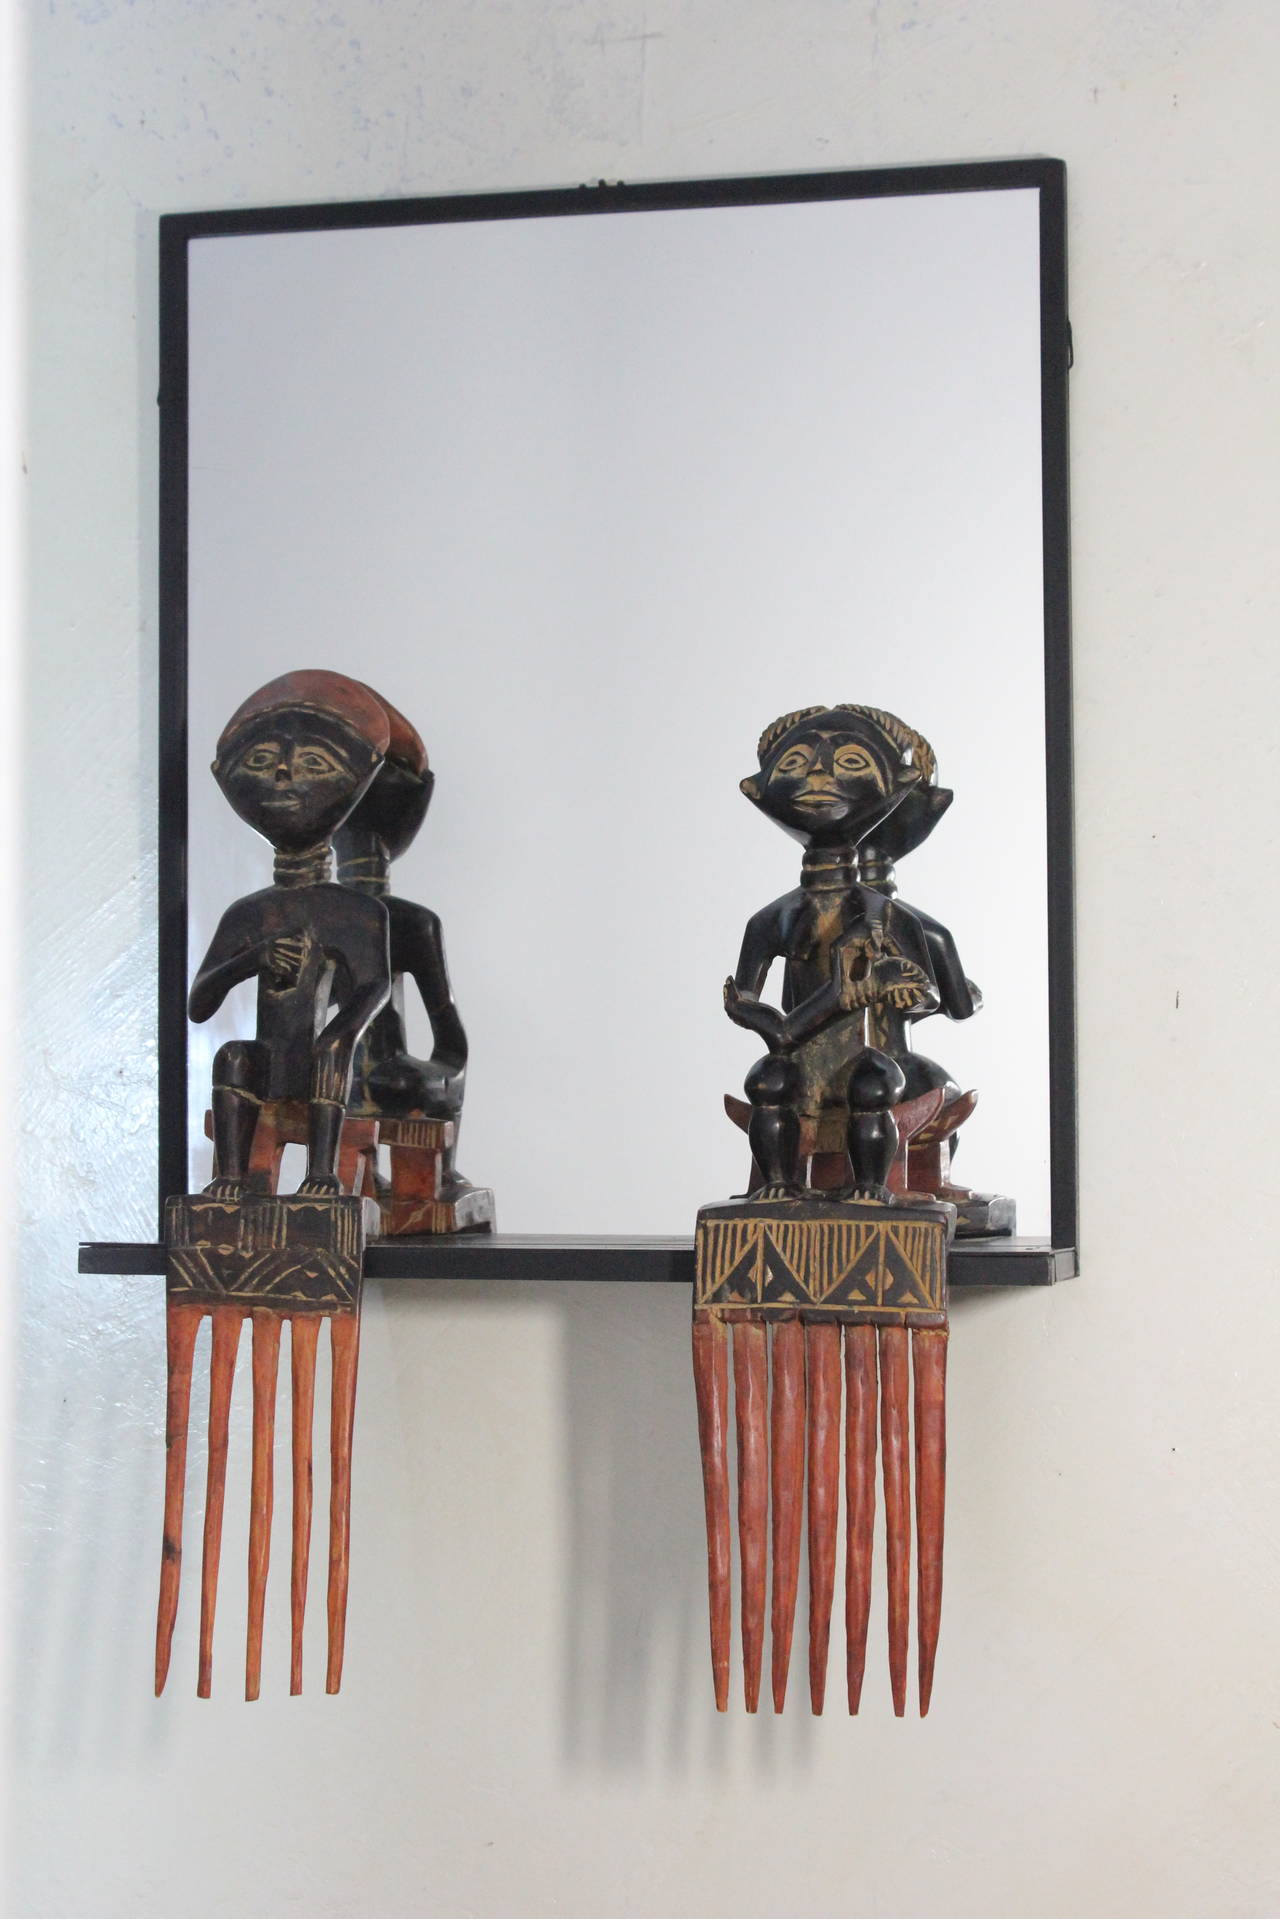 A one-of-a-kind black painted steel framed mirror with figural African comb
mounts, the figures are hand-carved and both different a very distinctive and exciting decorative object for your most interesting placement, 1970s.
Provenance: Assembled